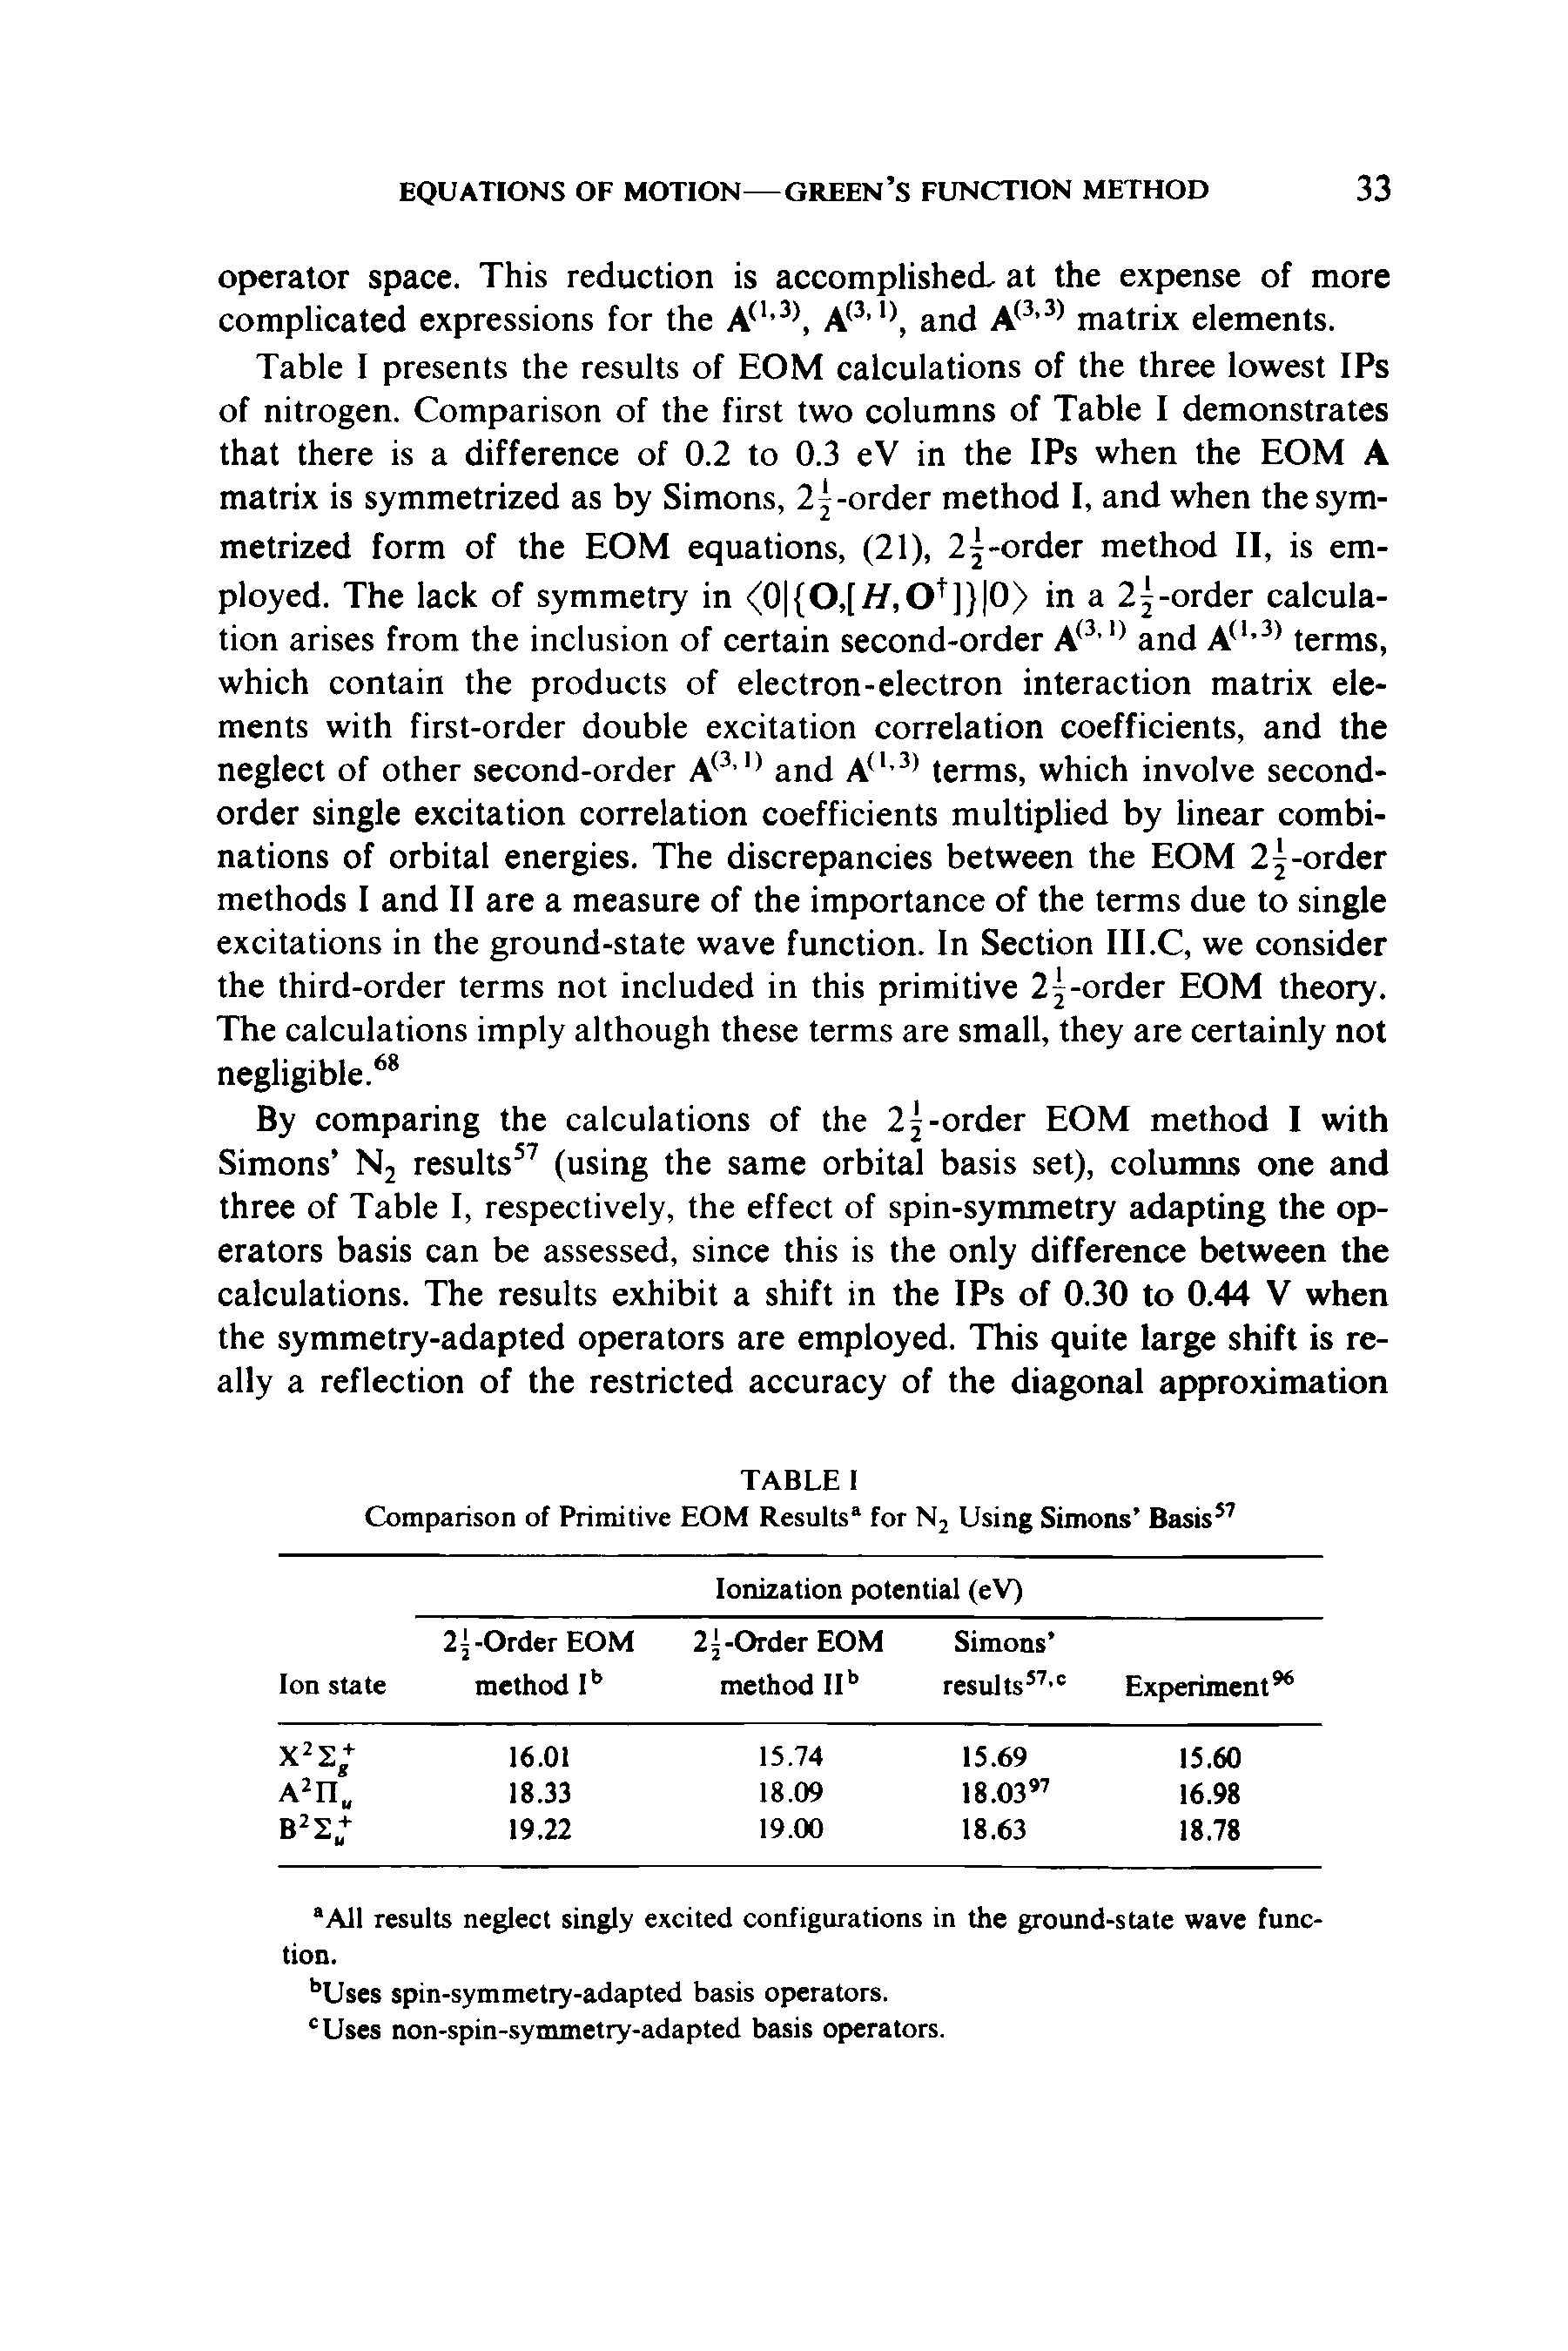 Table I presents the results of EOM calculations of the three lowest IPs of nitrogen. Comparison of the first two columns of Table I demonstrates that there is a difference of 0.2 to 0.3 eV in the IPs when the EOM A matrix is symmetrized as by Simons, 21-order method I, and when the symmetrized form of the EOM equations, (21), 2j-order method II, is employed. The lack of symmetry in <0 (0,[//,0 ]) 0) in a 2 -order calculation arises from the inclusion of certain second-order A and terms, which contain the products of electron-electron interaction matrix elements with first-order double excitation correlation coefficients, and the neglect of other second-order A and A - terms, which involve second-order single excitation correlation coefficients multiplied by linear combinations of orbital energies. The discrepancies between the EOM 2 -order methods I and II are a measure of the importance of the terms due to single excitations in the ground-state wave function. In Section III.C, we consider the third-order terms not included in this primitive 2 -order EOM theory. The calculations imply although these terms are small, they are certainly not negligible. ...